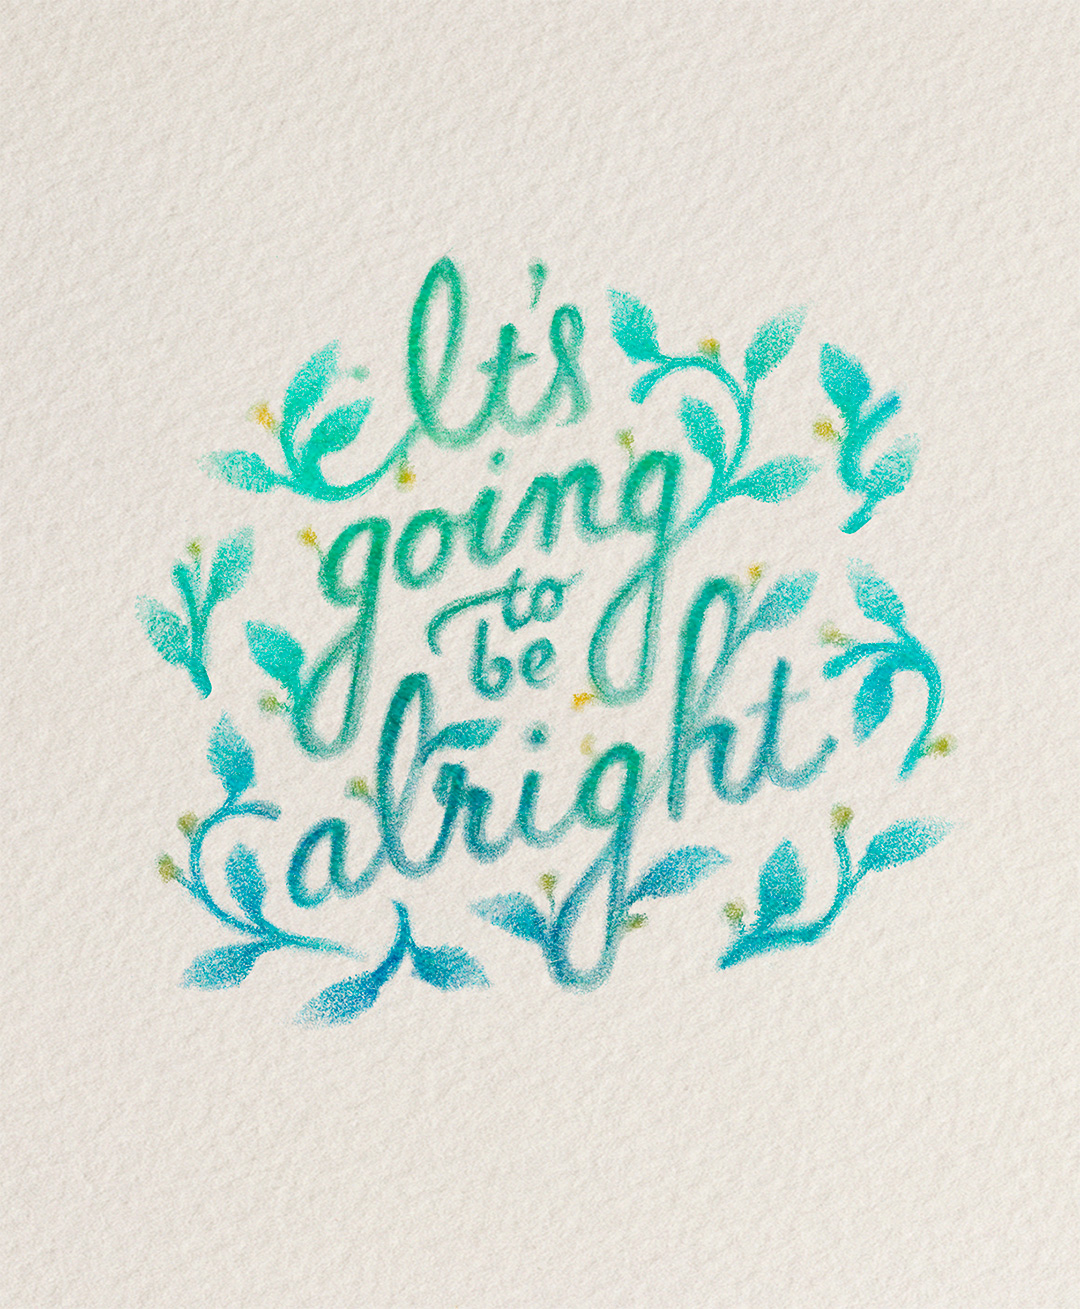 "It's going to be alright," colored illustrated lettering by Laura Dreyer. Lyrics by Sara Groves.